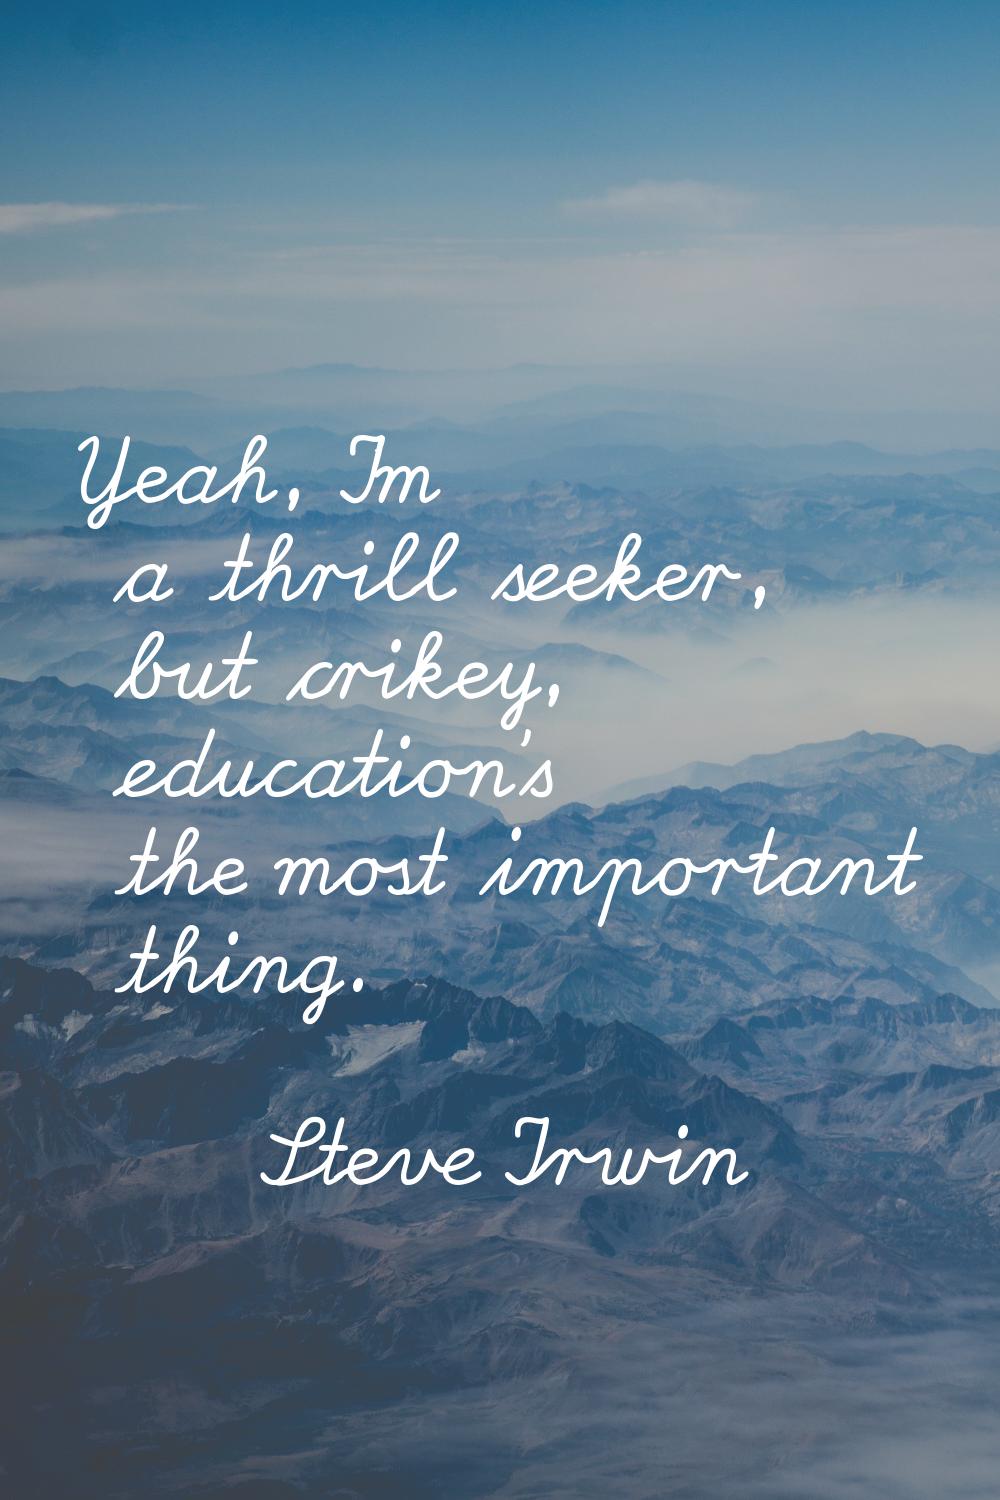 Yeah, I'm a thrill seeker, but crikey, education's the most important thing.